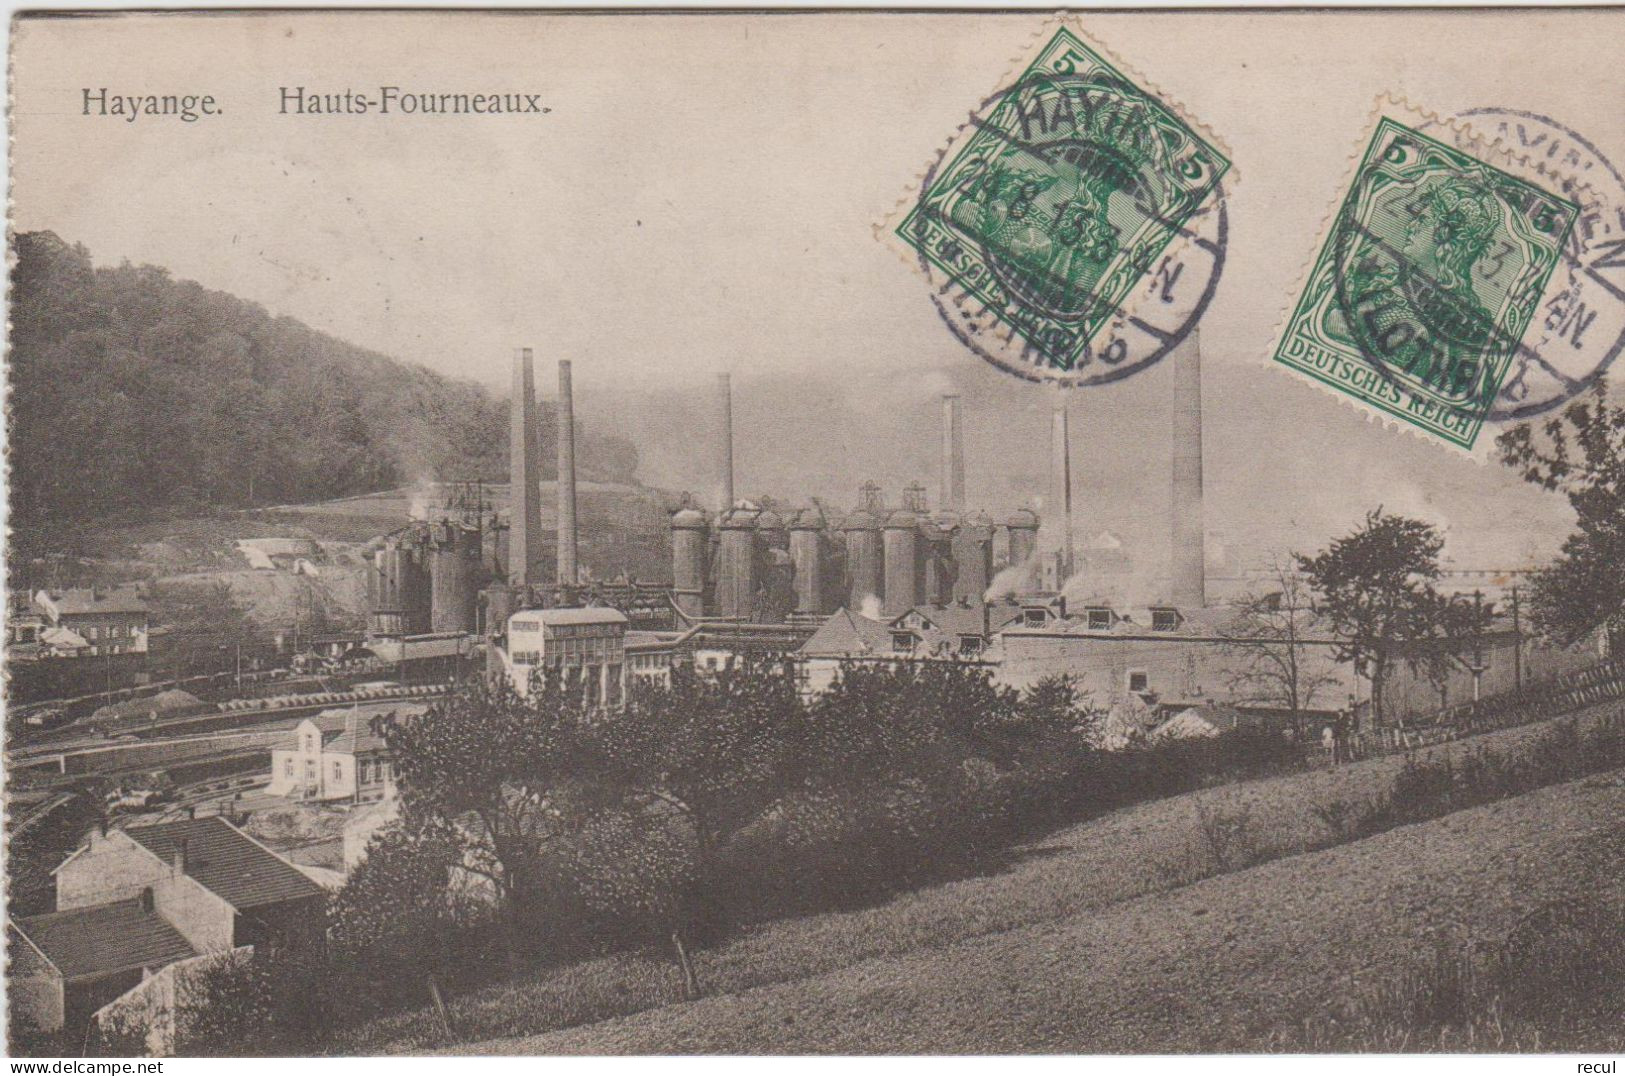 MOSELLE - HAYANGE - Hauts Fourneaux  ( - Timbre à Date HAYINGEN 1913 /timbre Allemand) - Hayange